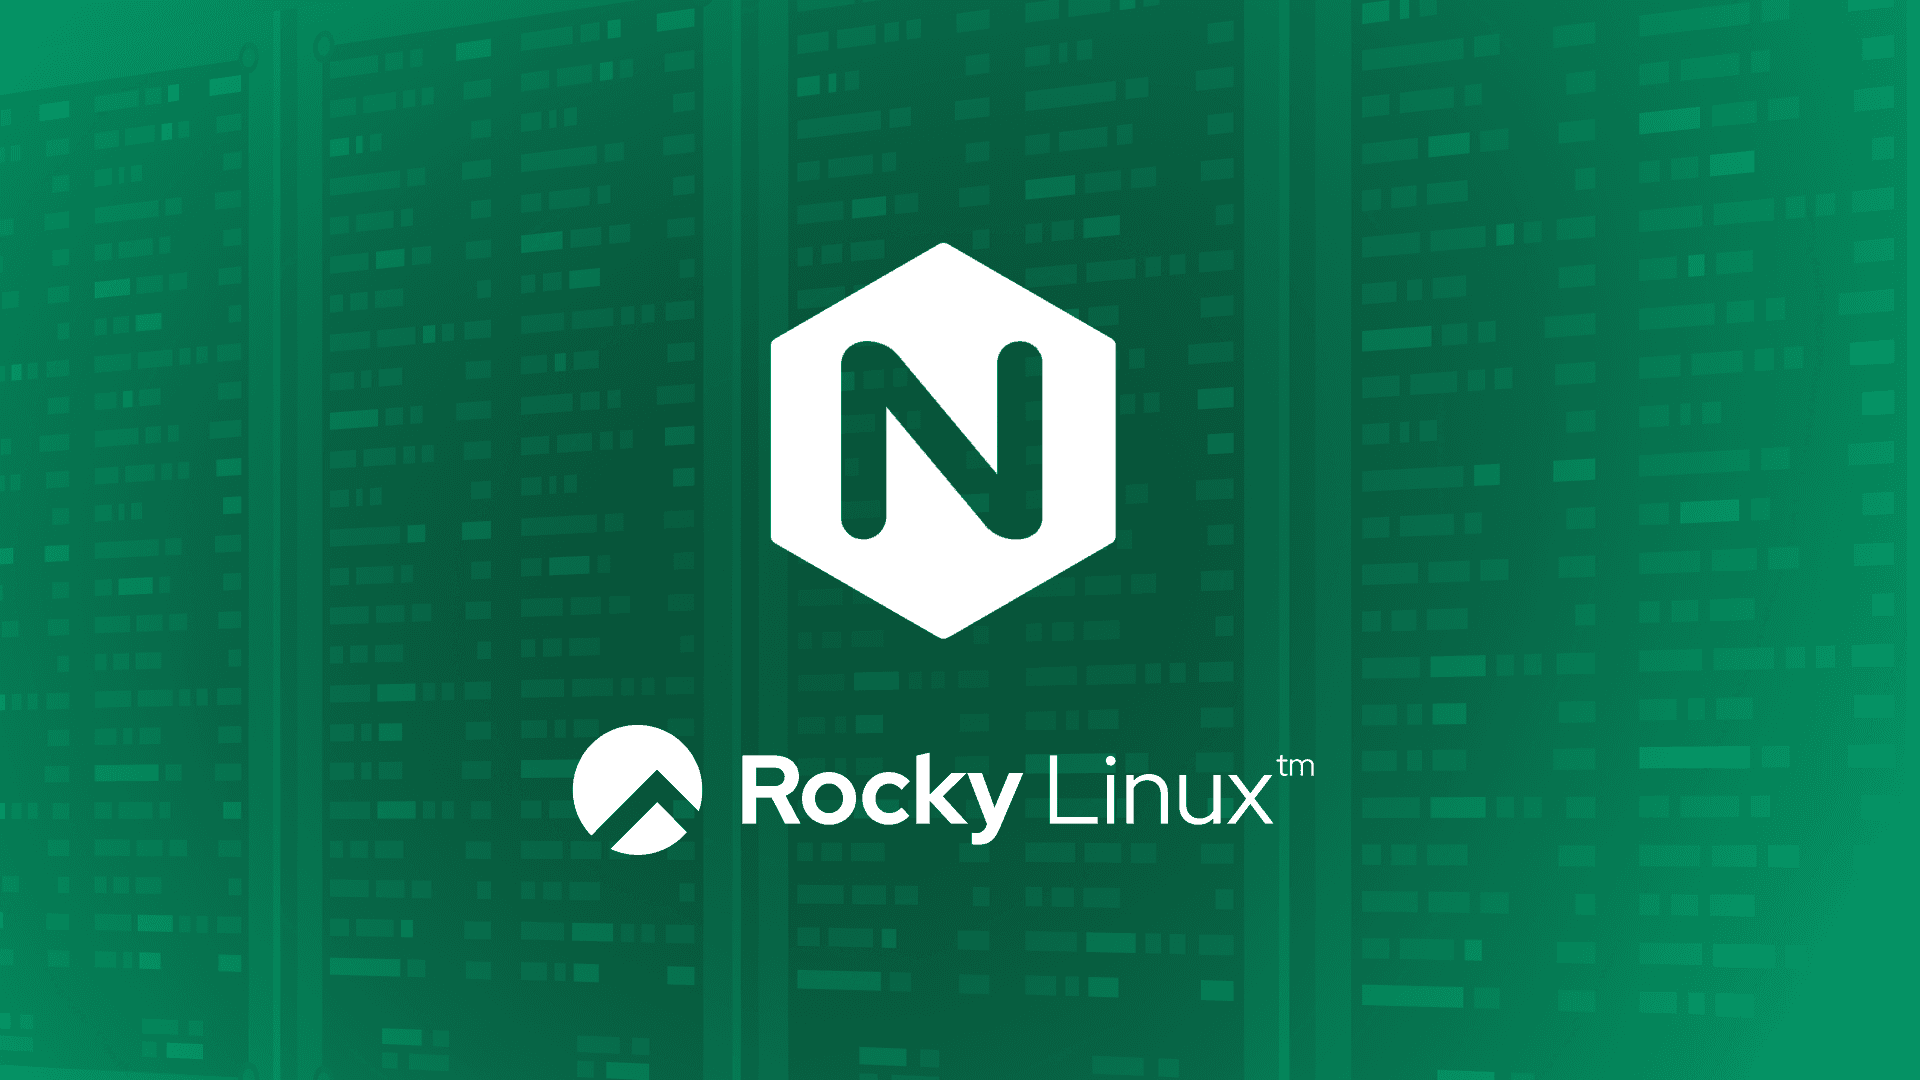 How to Install the NGINX Web Server on Rocky Linux